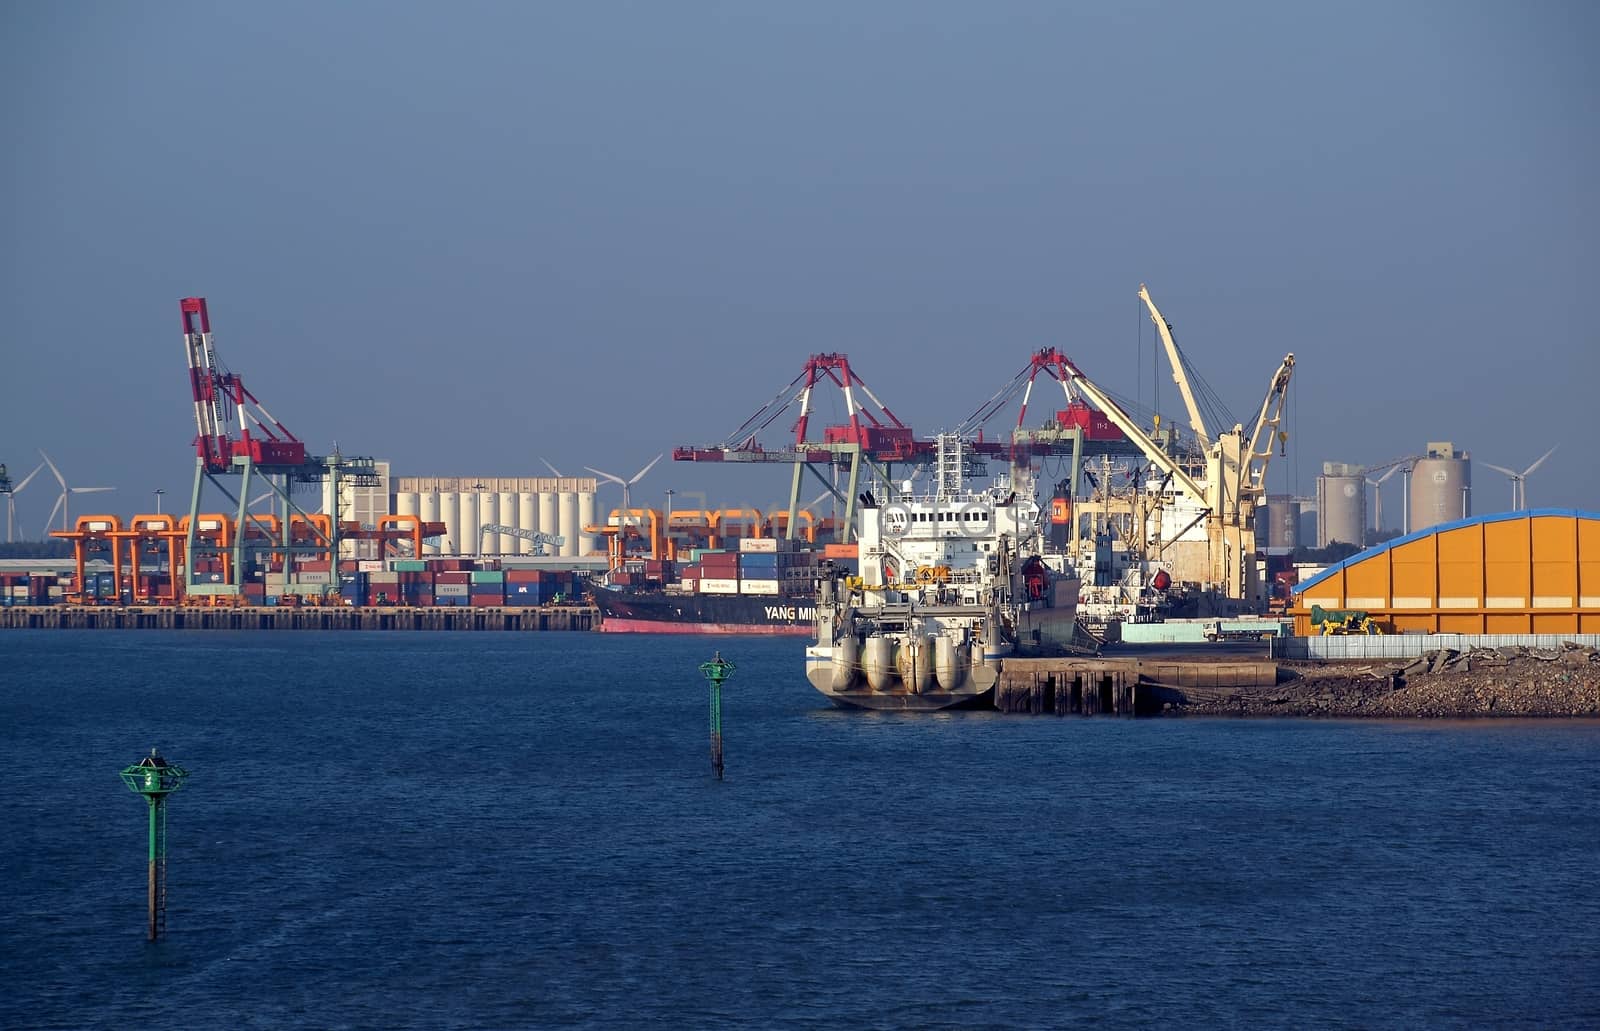 TAICHUNG, TAIWAN -- JANUARY 1, 2014: A partial view of Taichung Port, which is now the second-largest port in Taiwan after Kaohsiung Port.